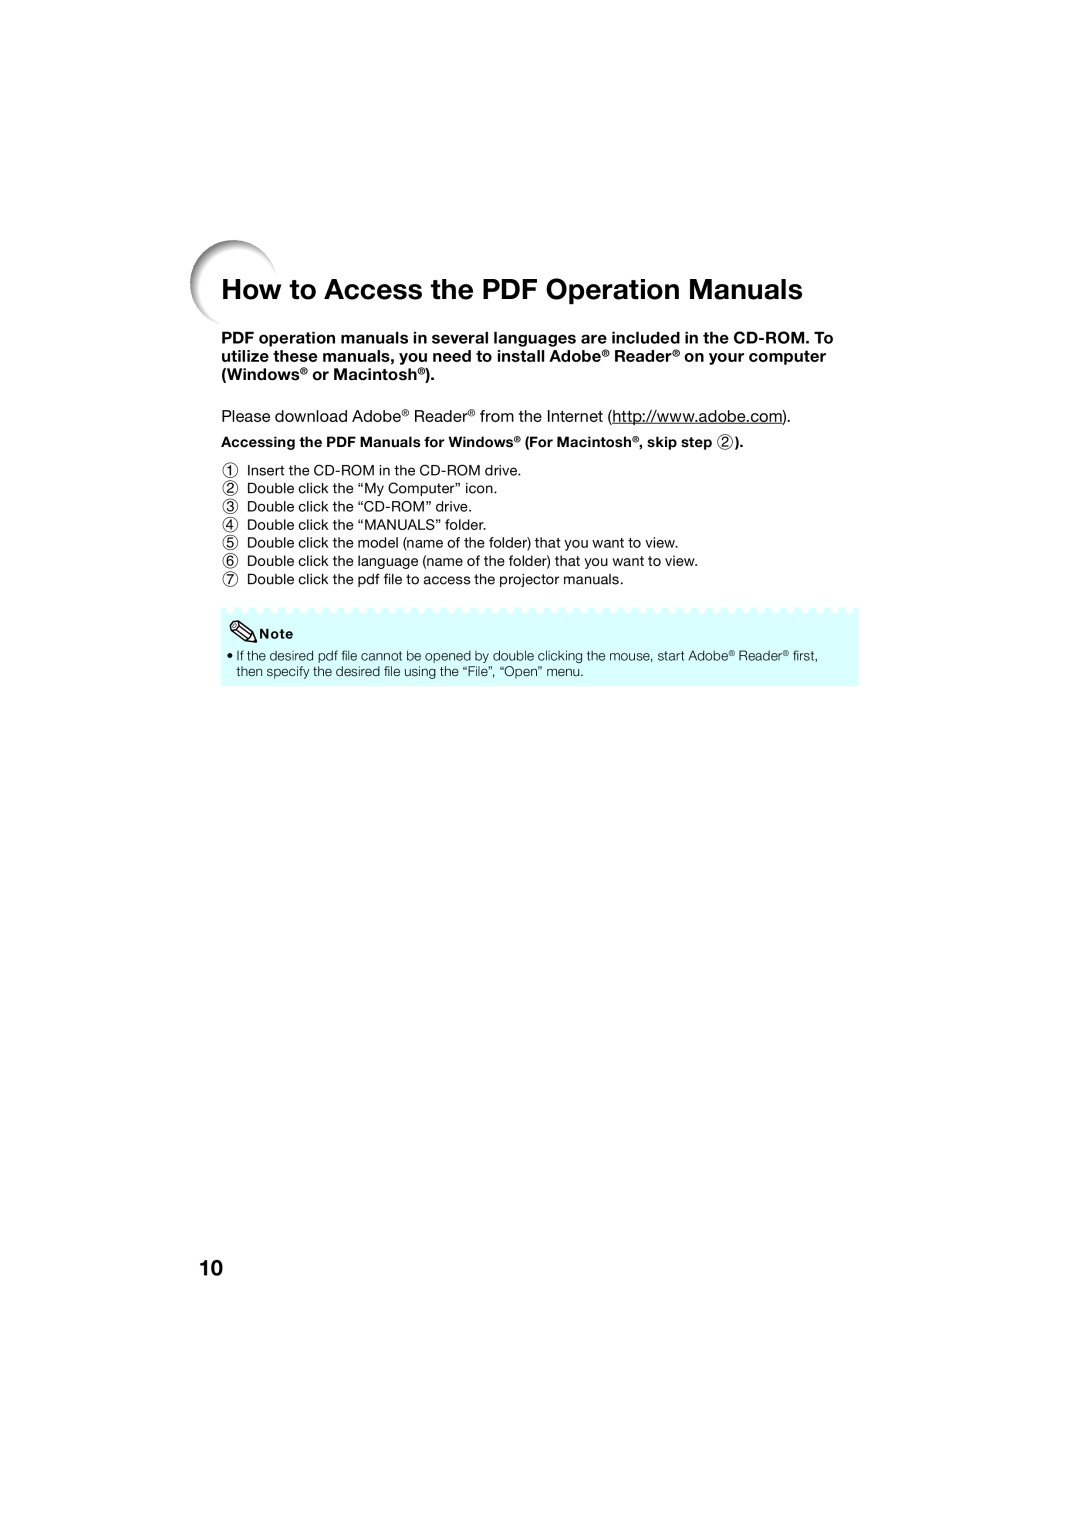 Sharp XR-55X How to Access the PDF Operation Manuals, Accessing the PDF Manuals for Windows For Macintosh, skip step 